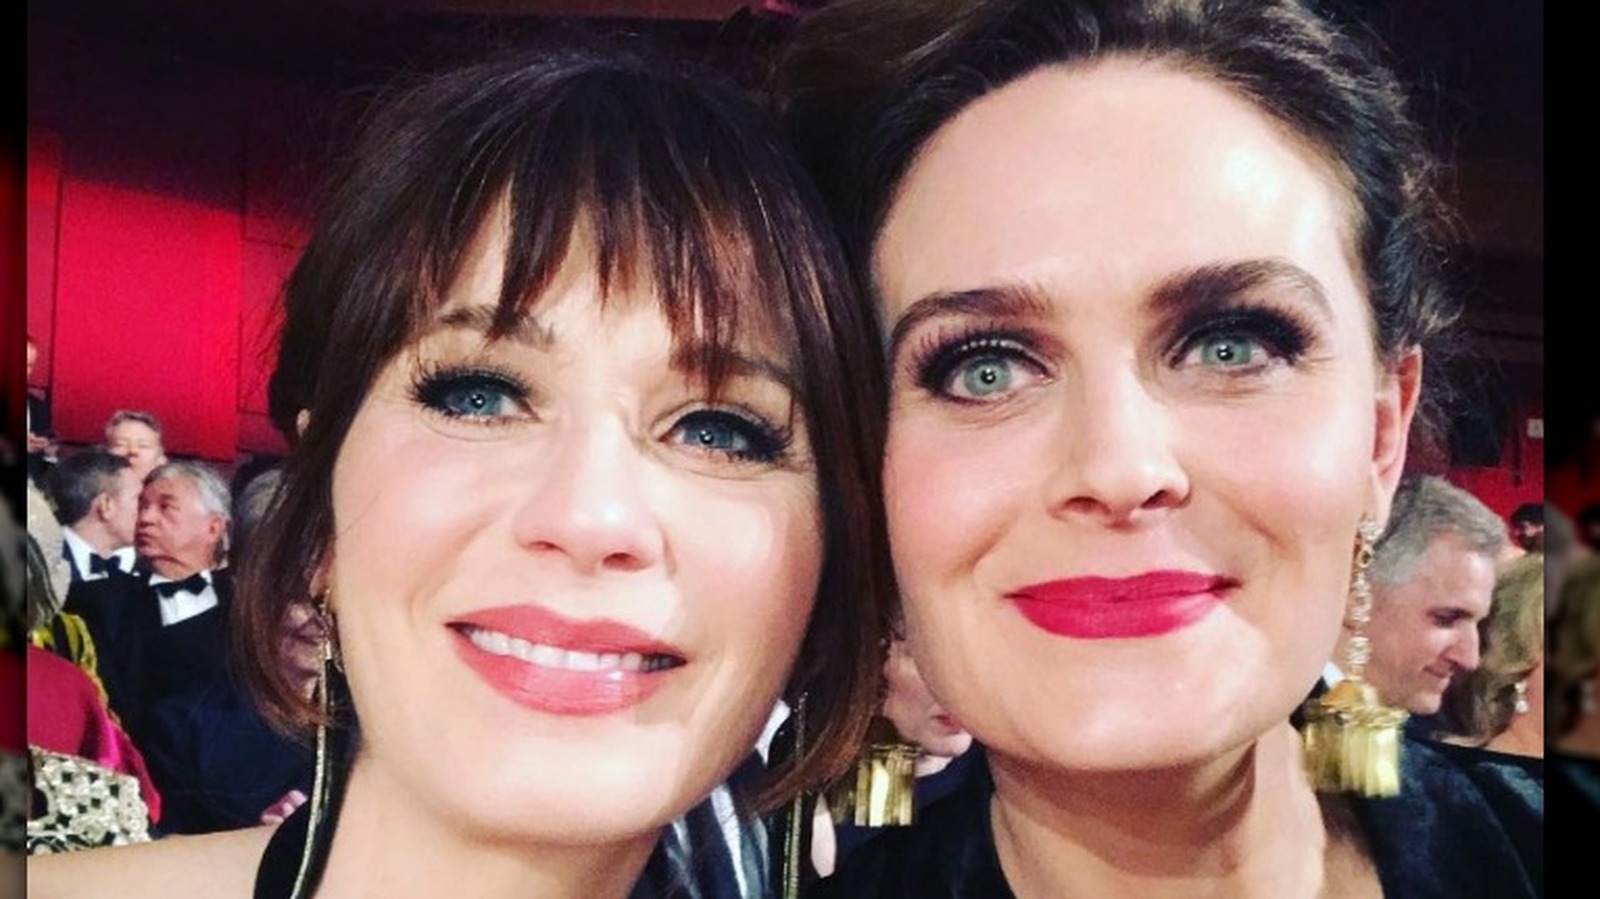 zooey and emily deschanel havent always got along as sisters